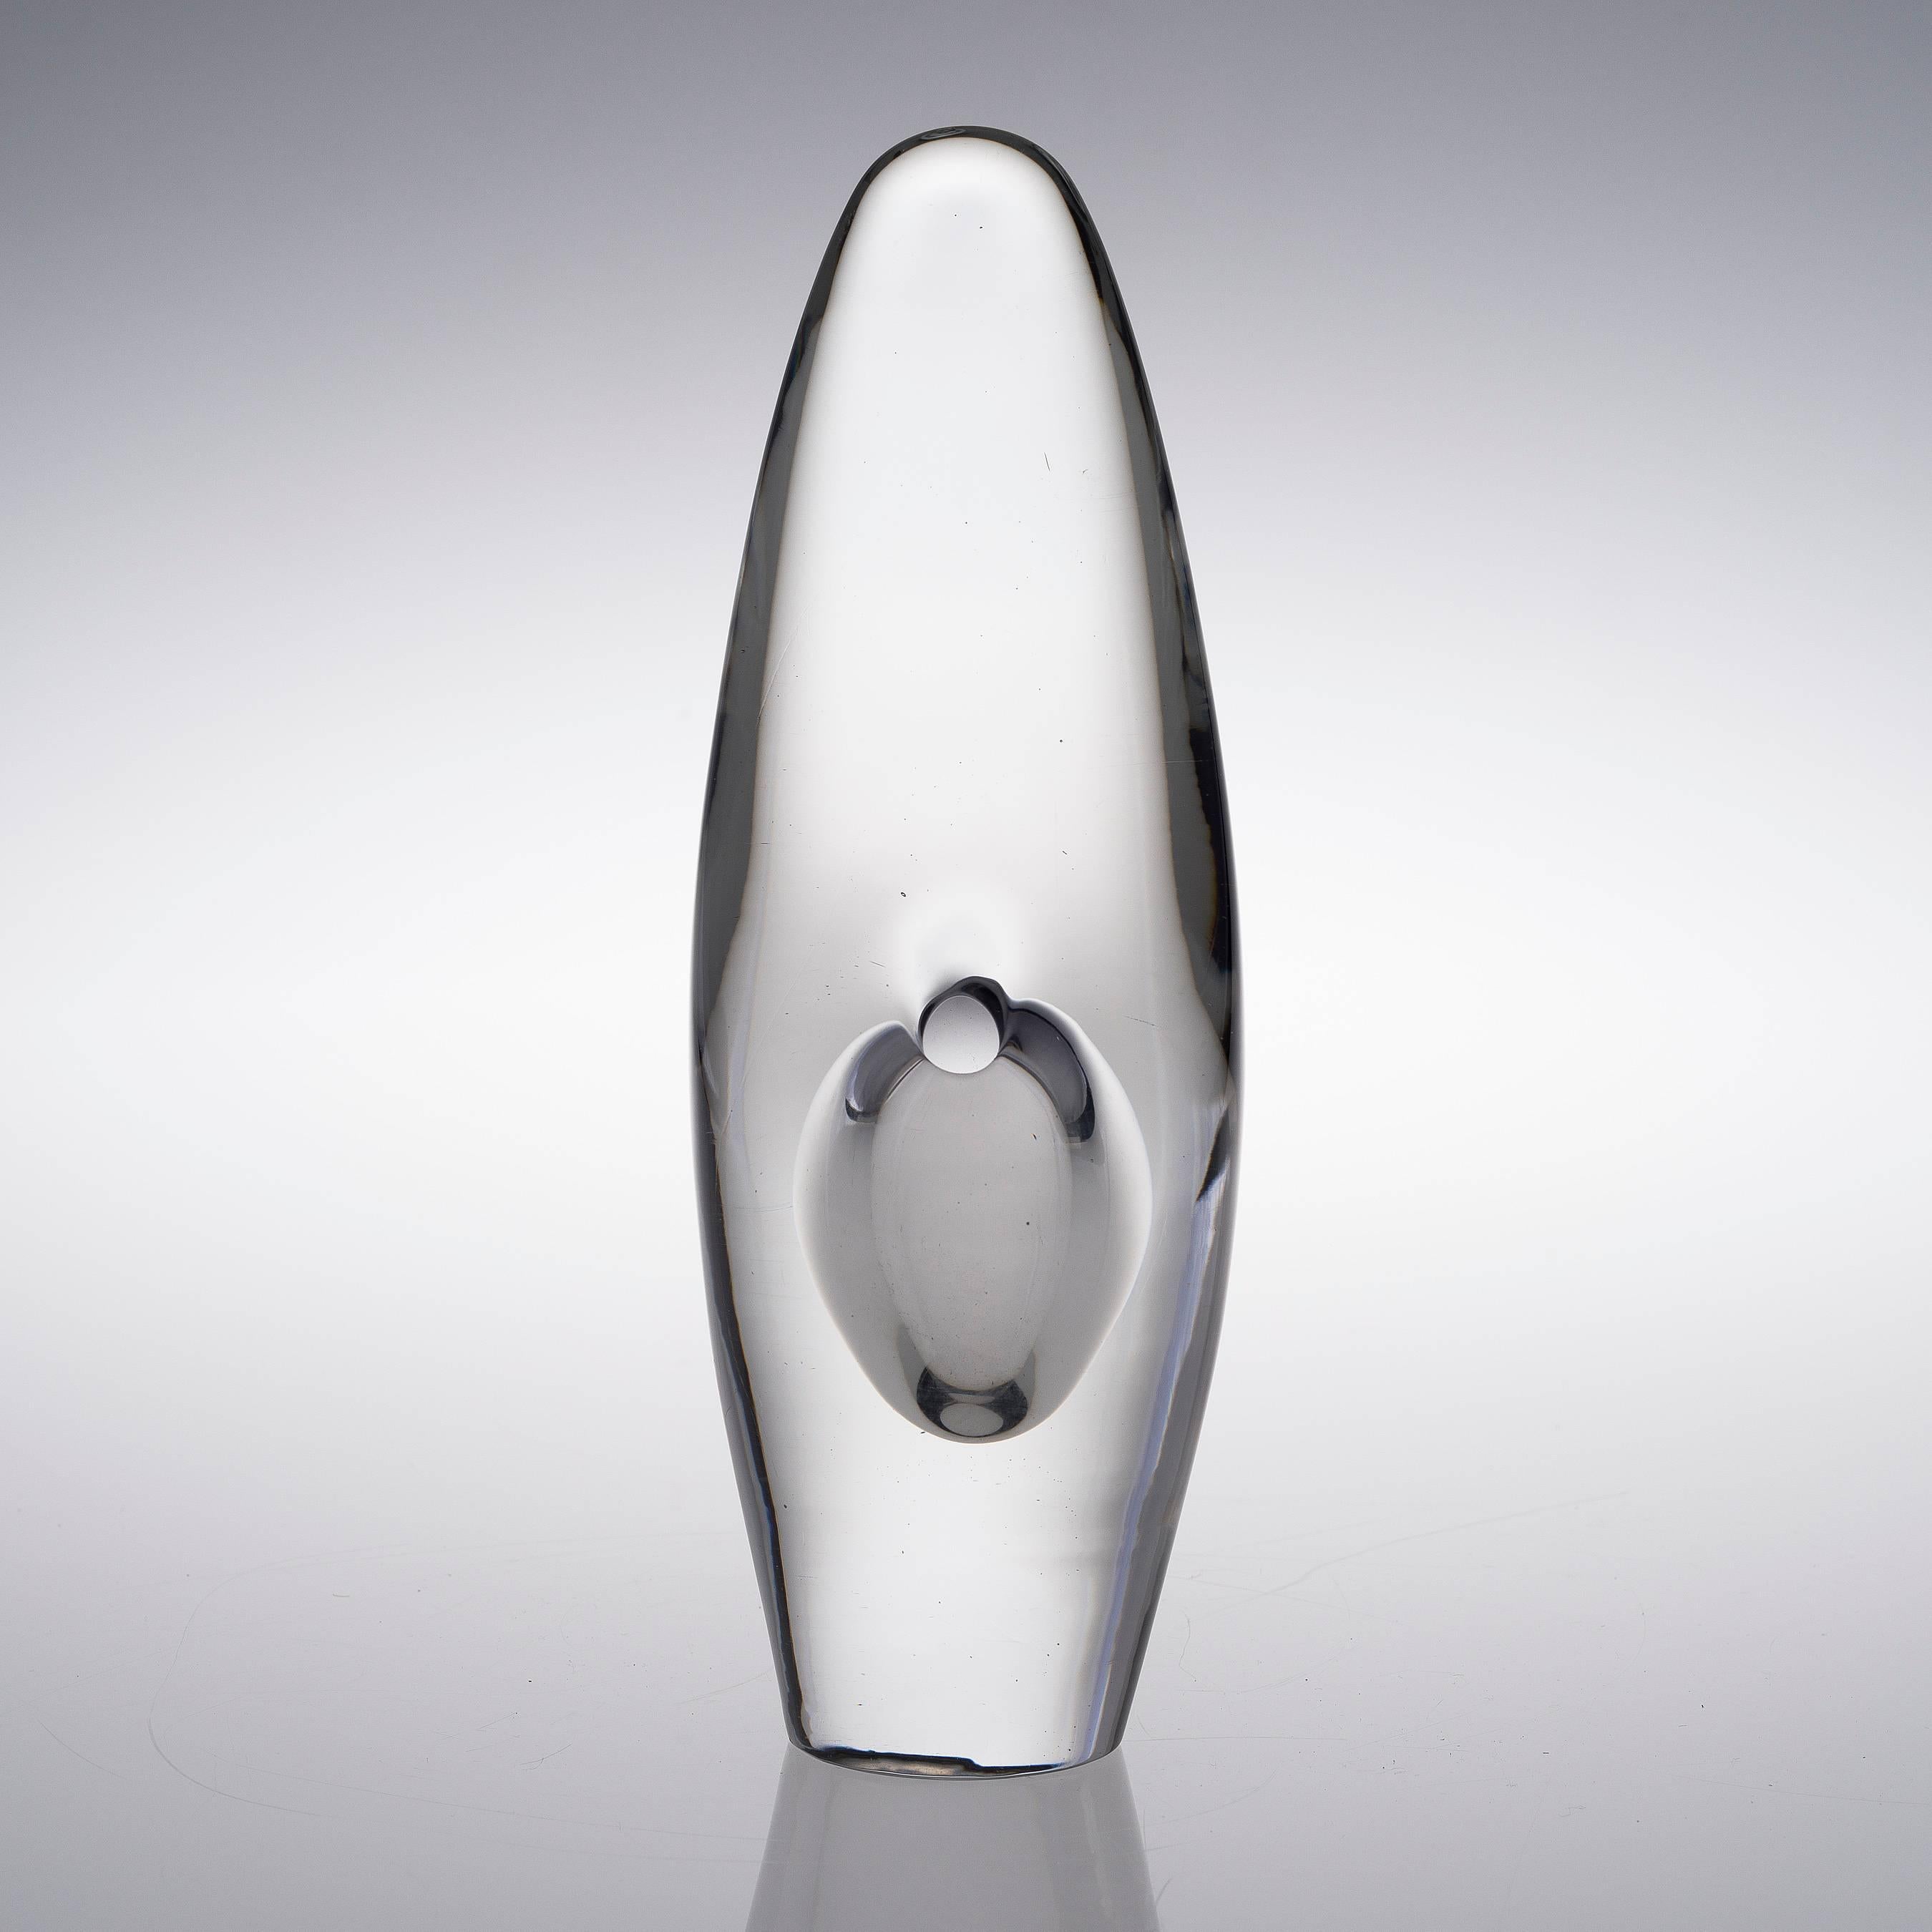 A Timo Sarpaneva glass sculpture. Orchid. Signed "Timo Sarpaneva 1954". Art glass.
Shipping to anywhere in the world: 150 Euros. Complimentary to certain destinations.